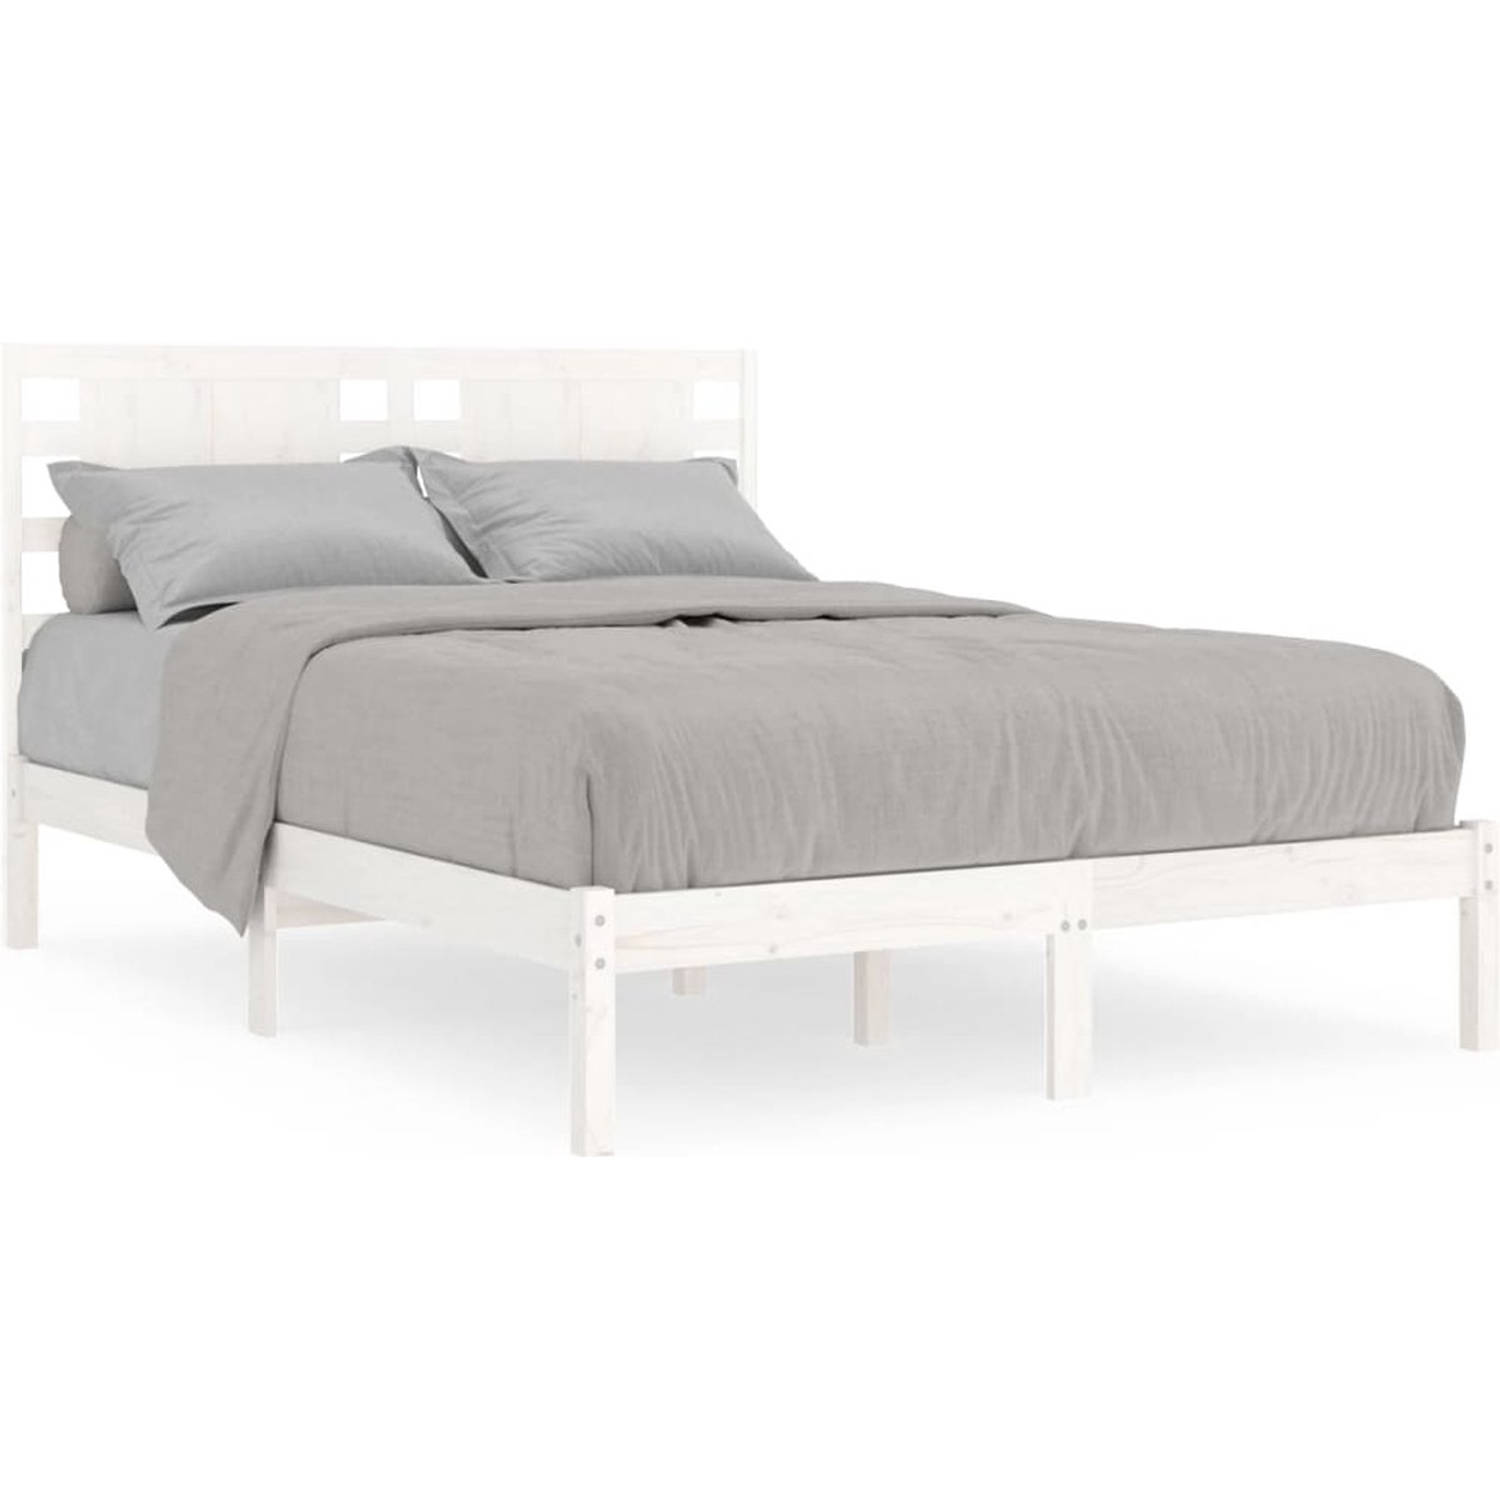 The Living Store Houten Bedframe - Classic - Bed - 195.5 x 126 x 100 cm - Wit